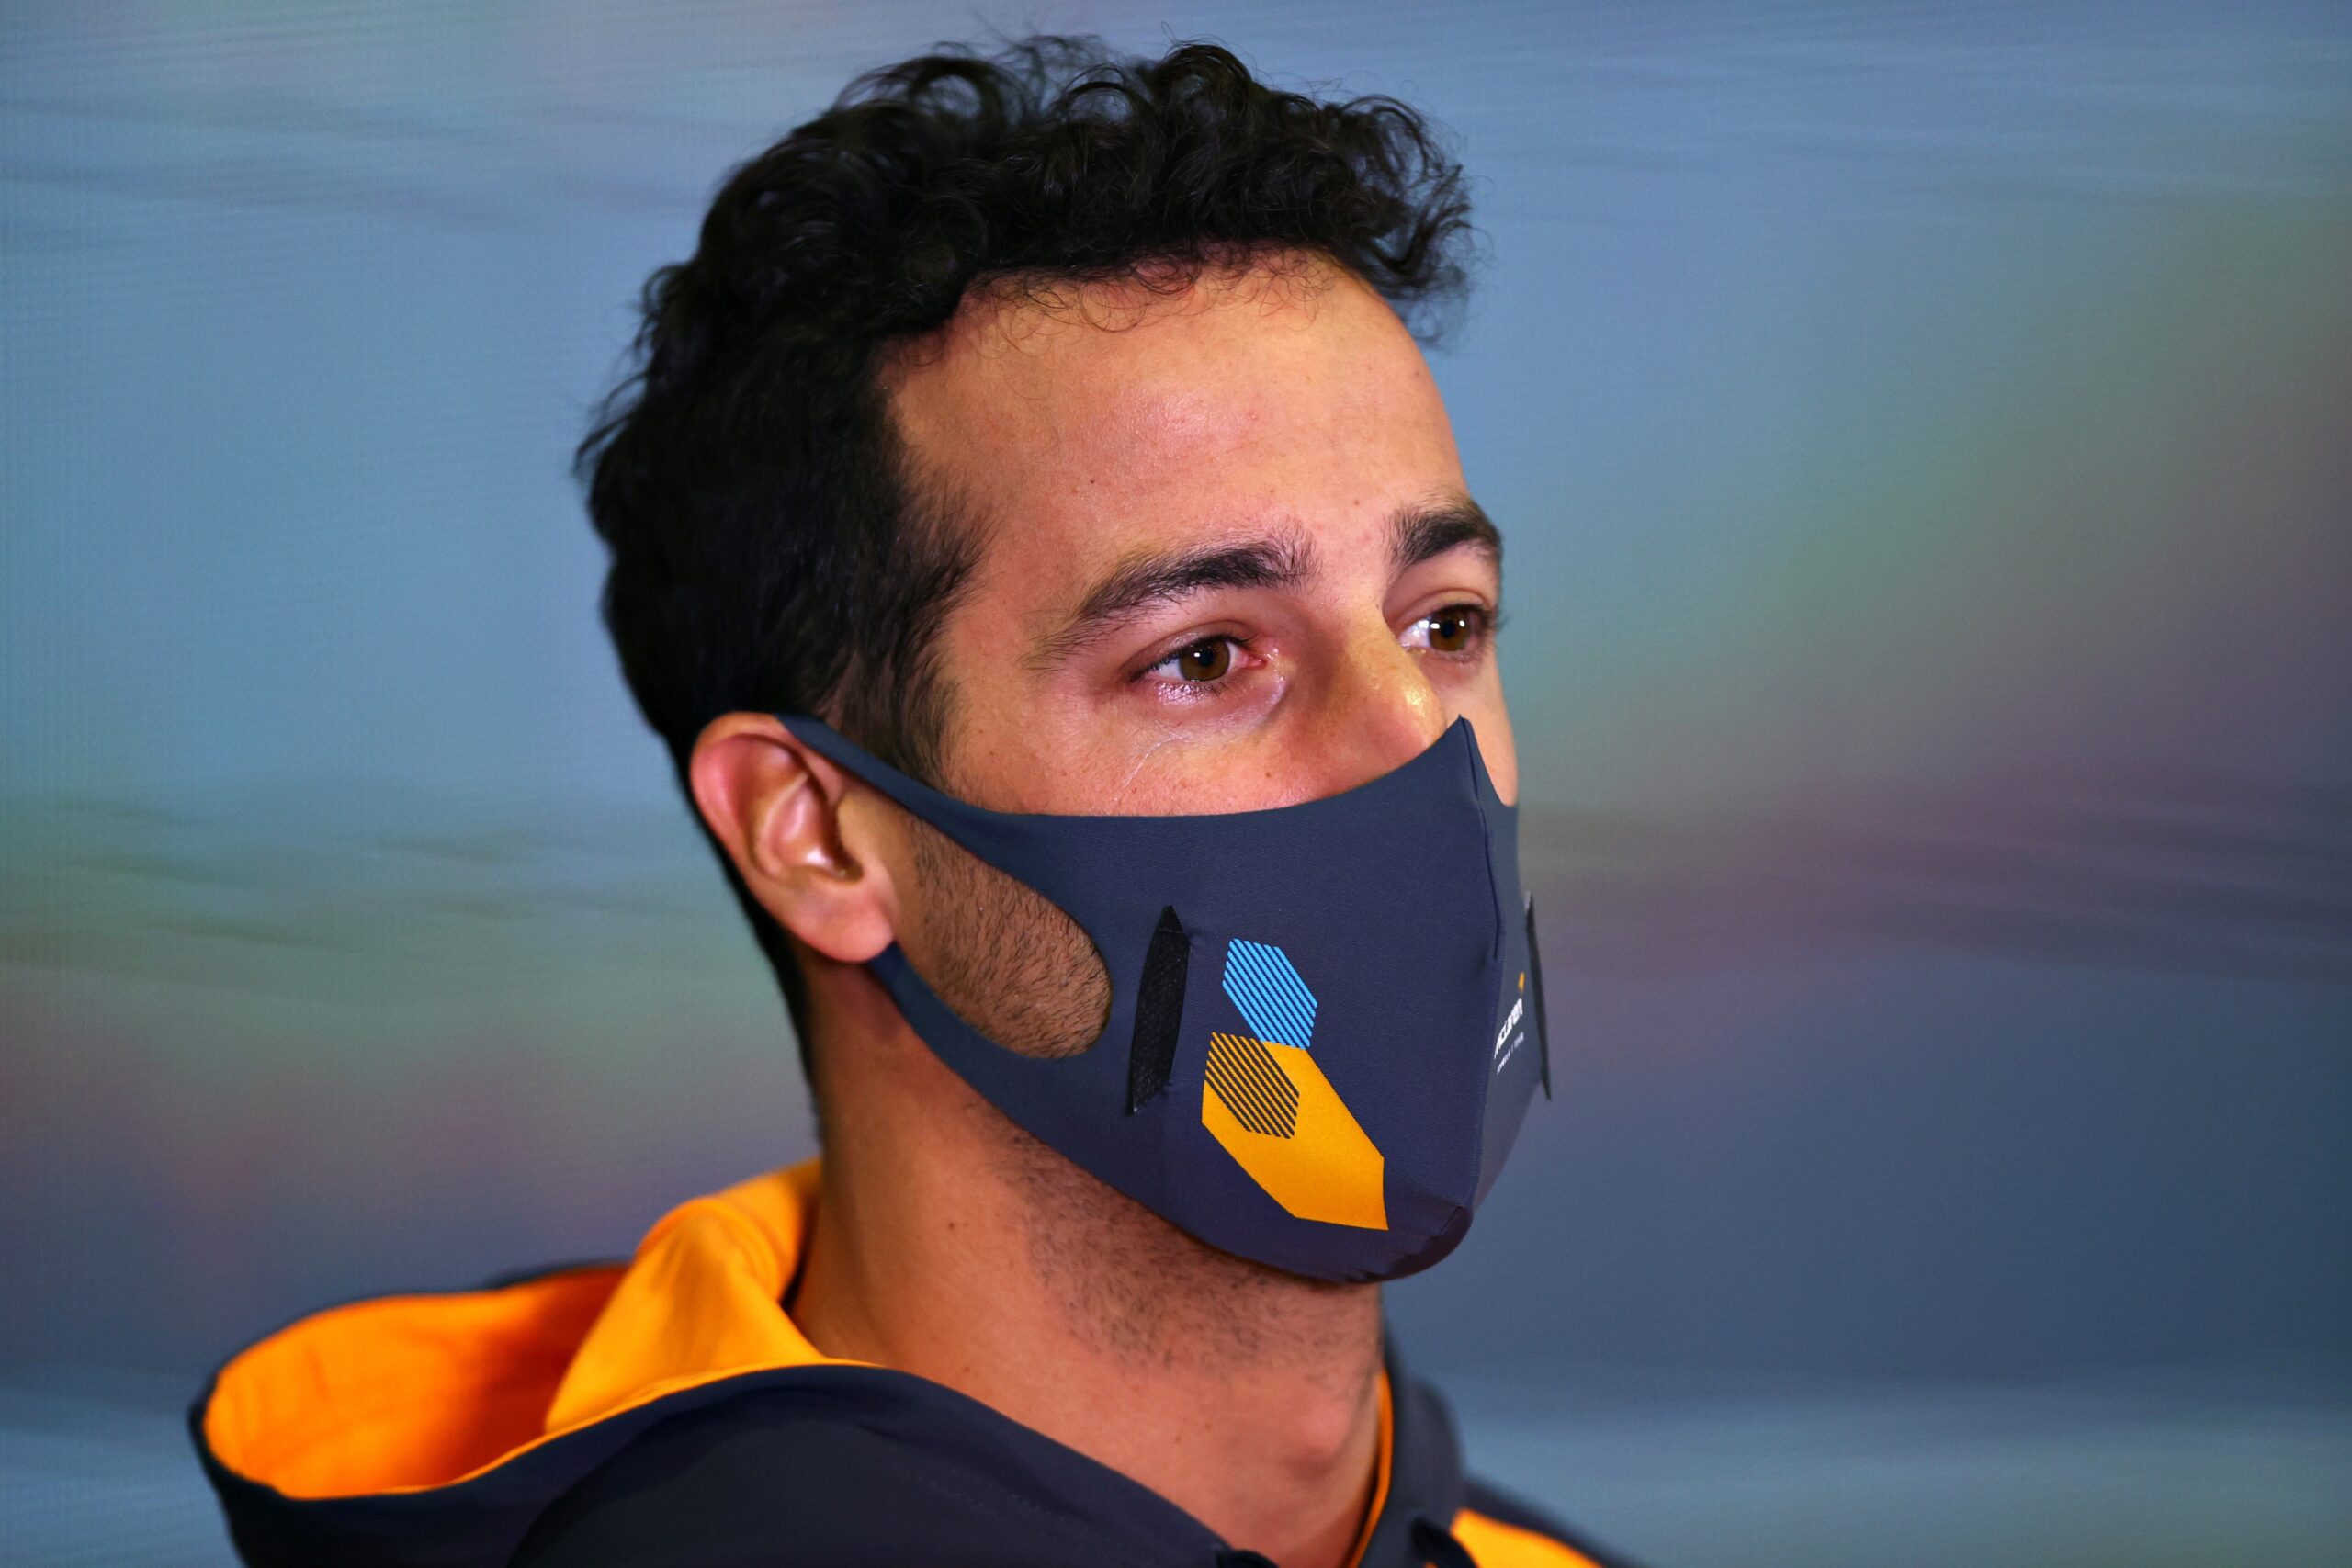  Daniel Ricciardo has tested positive for Covid and expects to be fit for the start of the F1 season